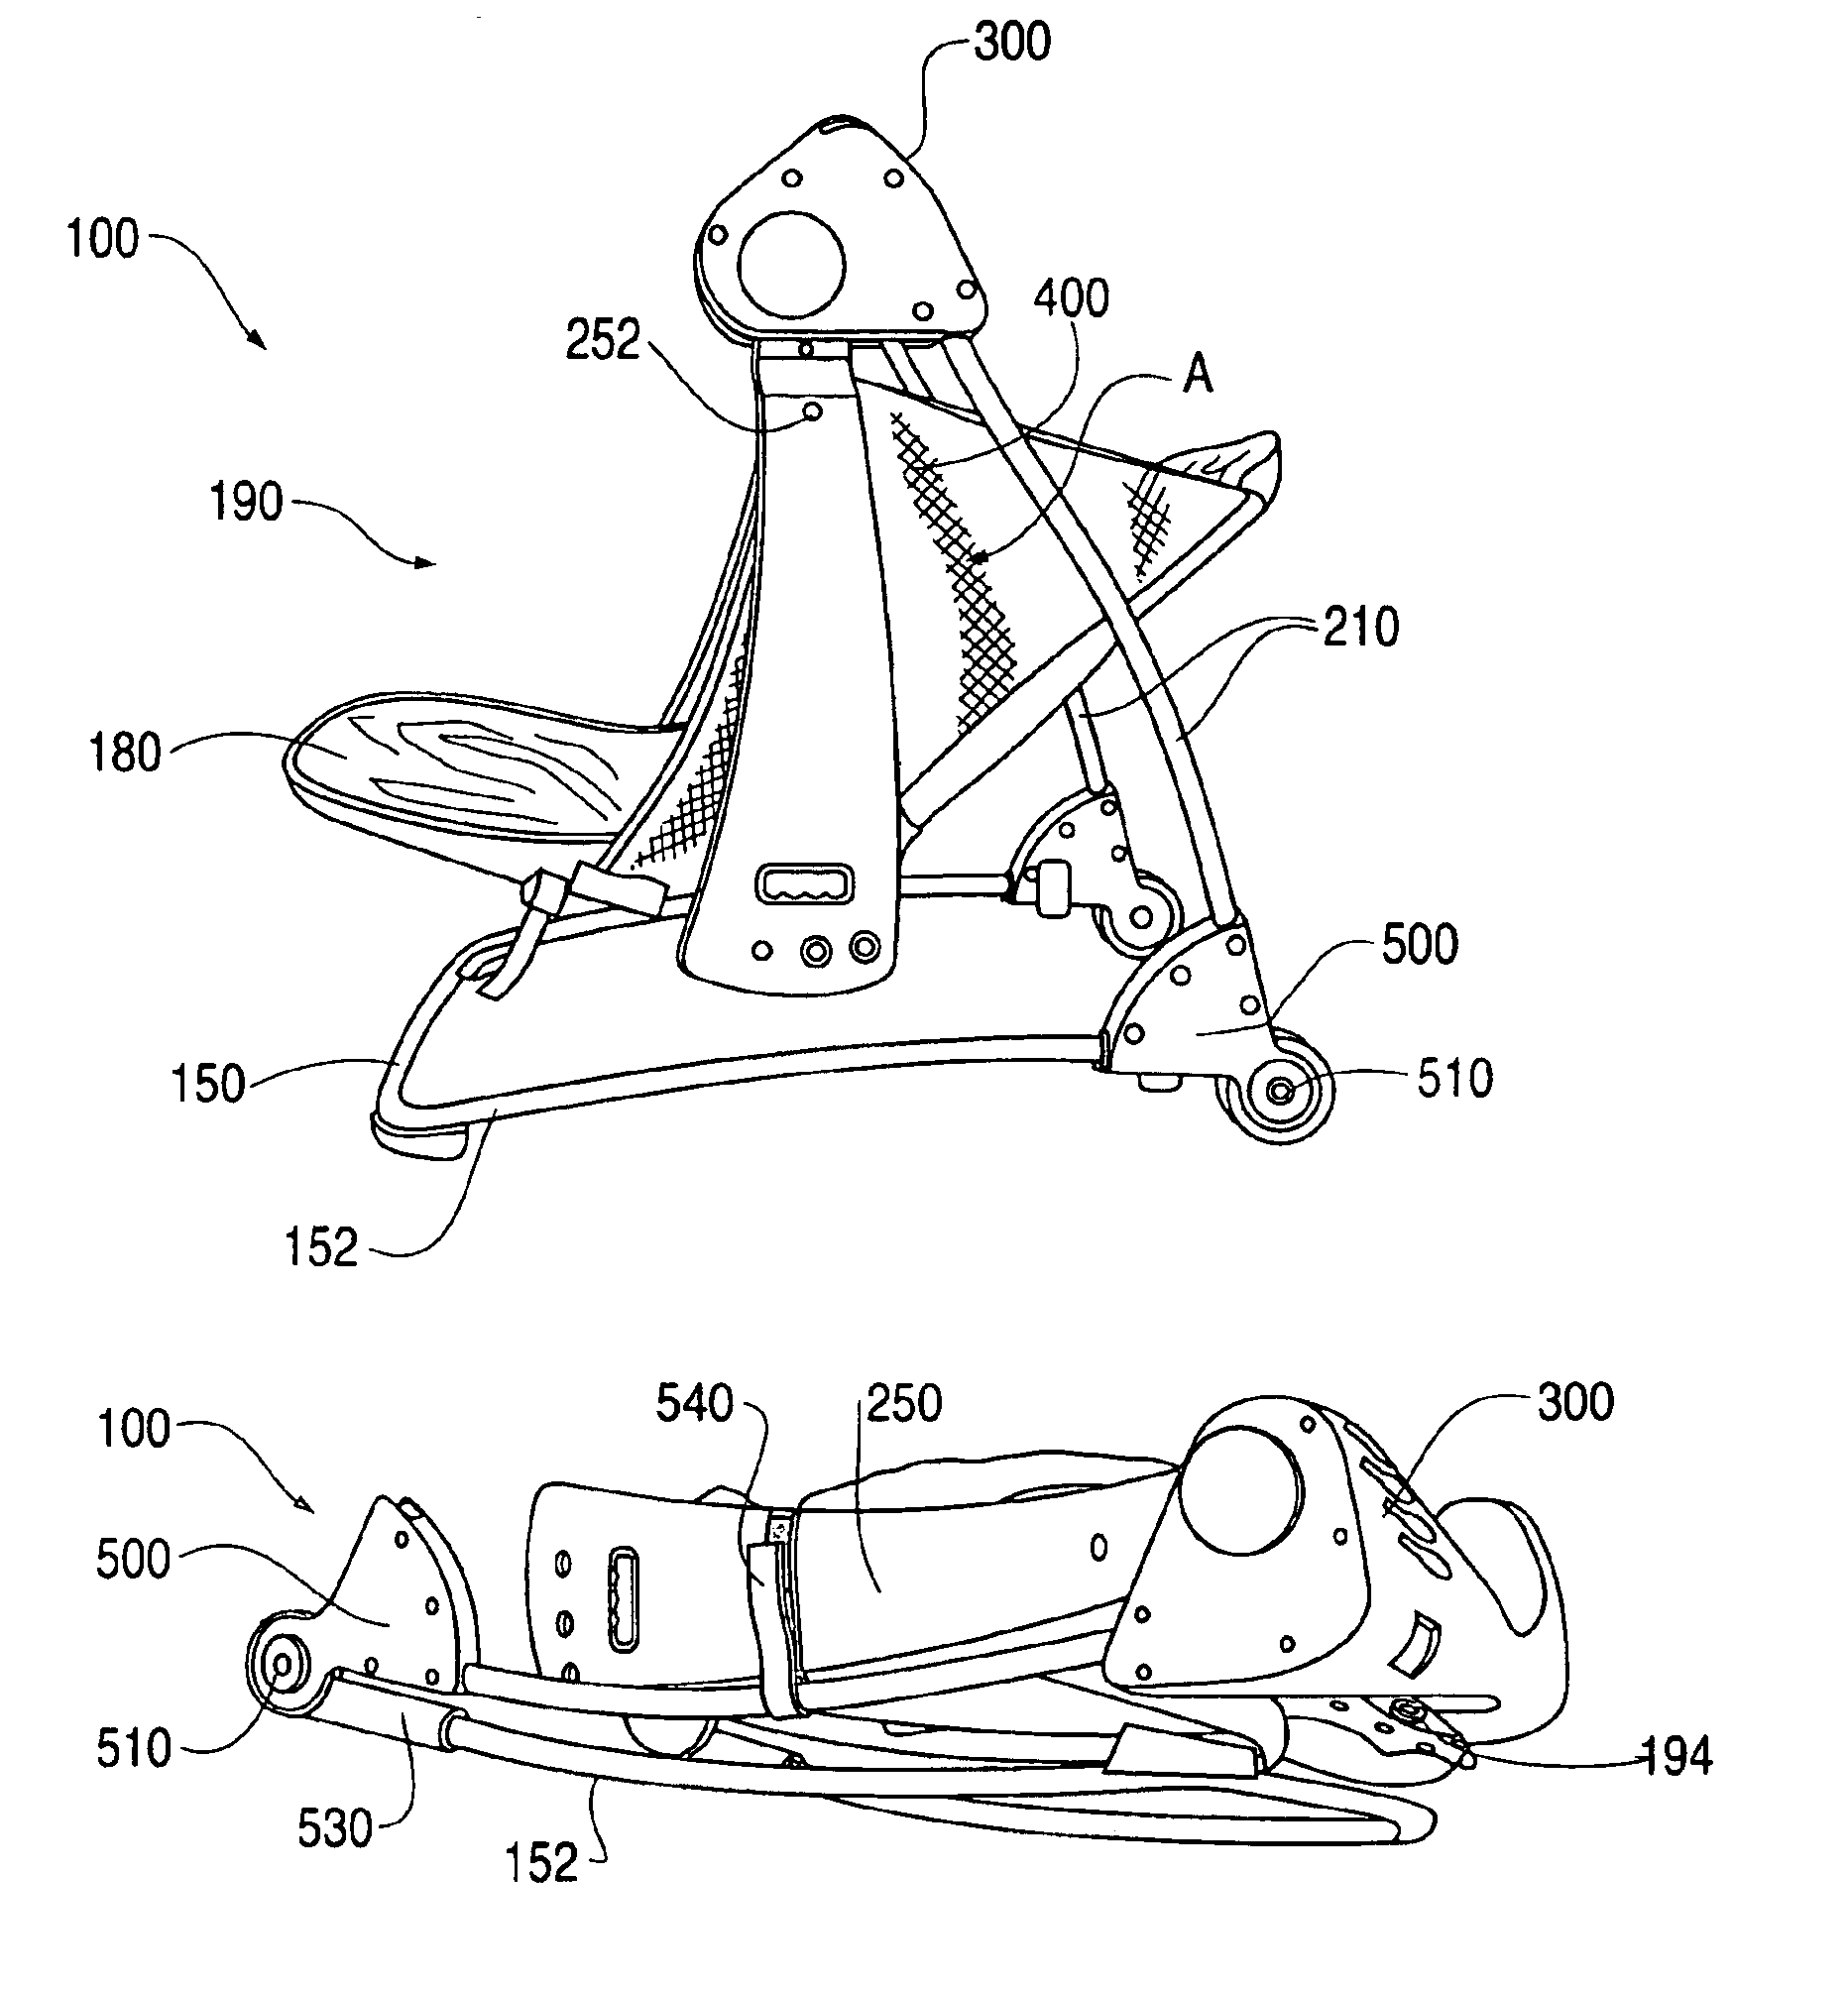 Collapsible infant swing